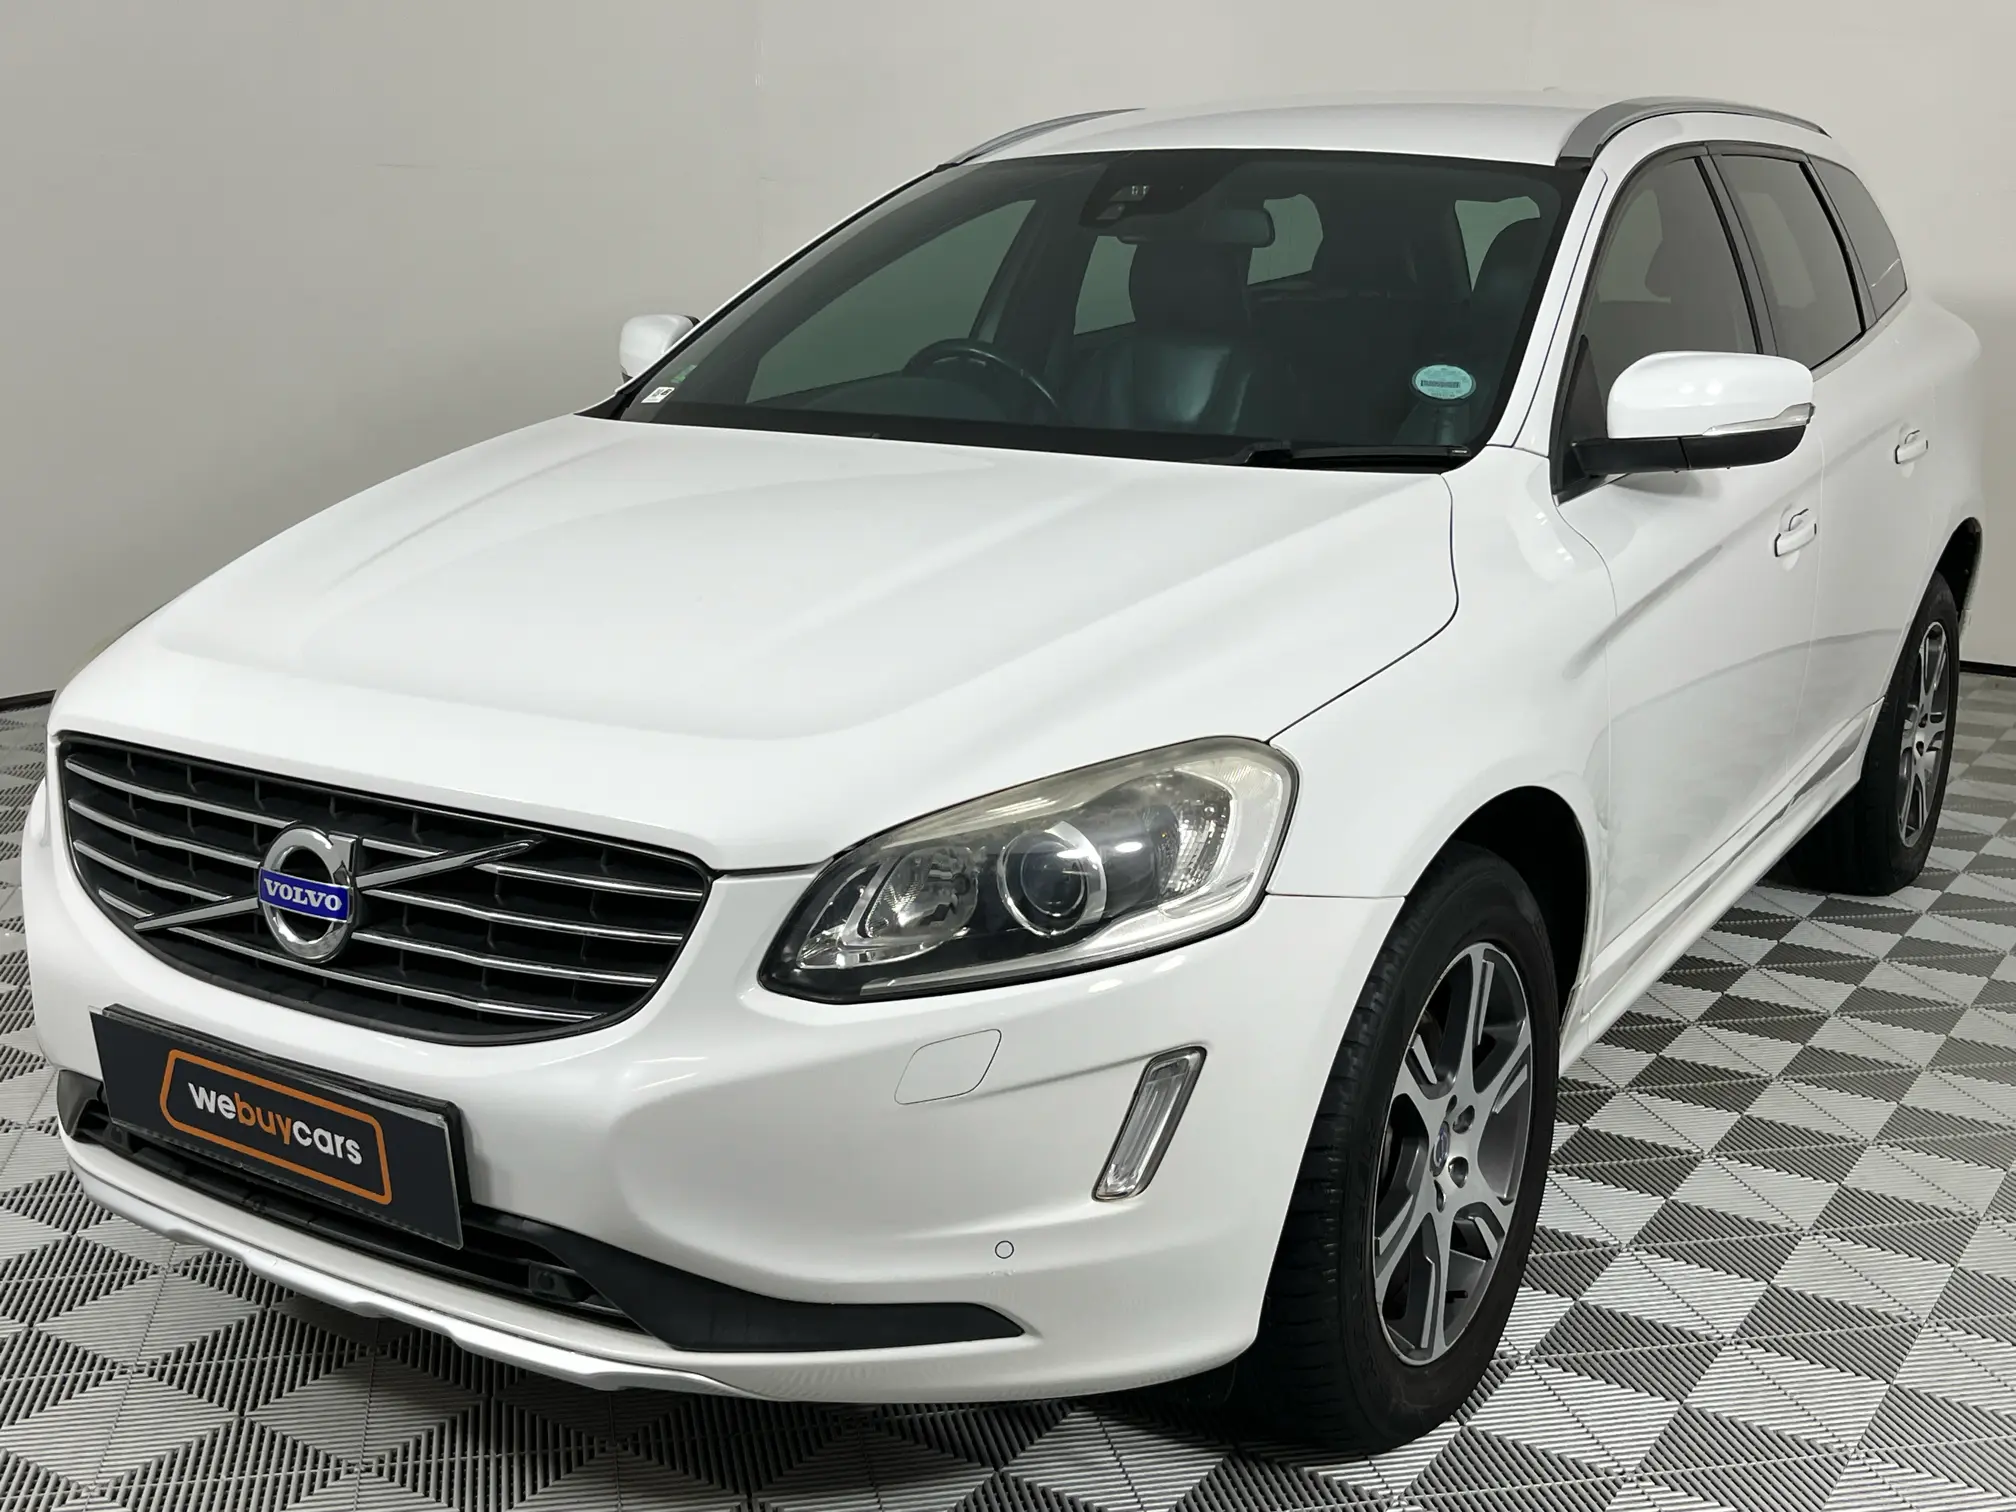 2013 Volvo Xc60 D4 Essential Geartronic